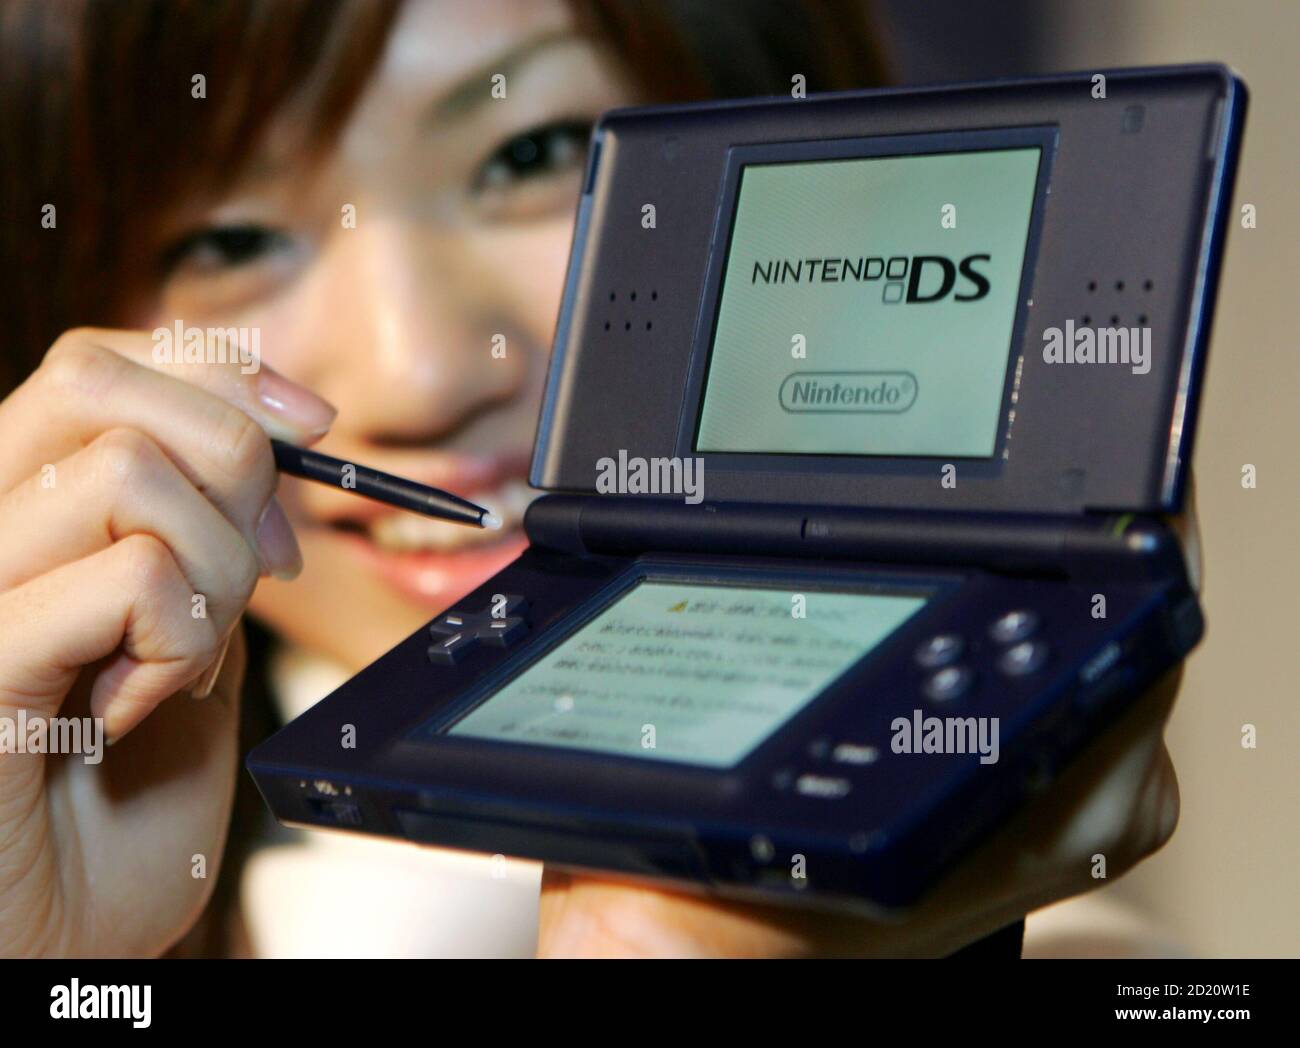 Nintendo Ds Lite High Resolution Stock Photography and Images - Alamy